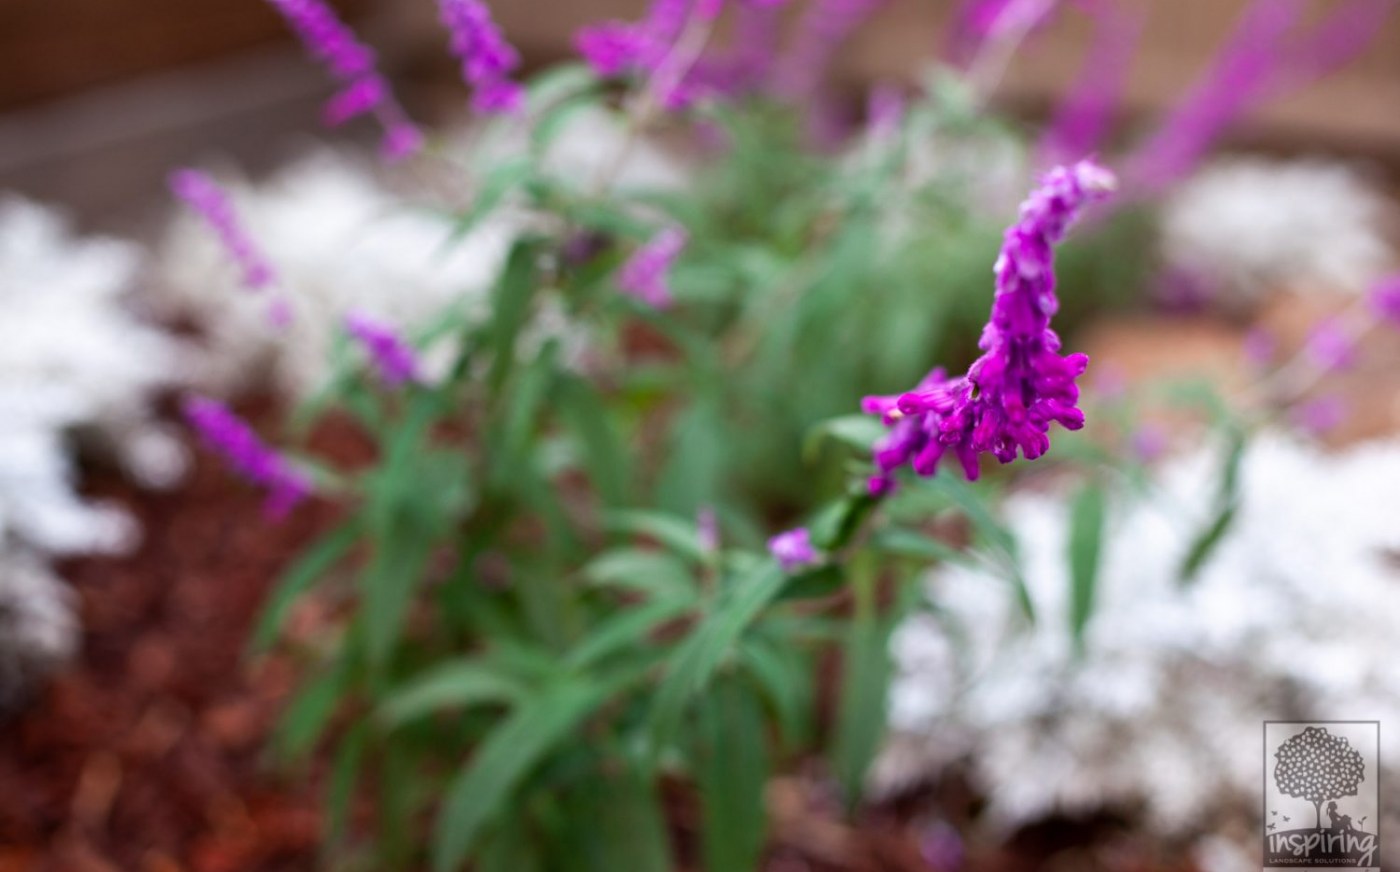 Salvia used in Vermont South landscape design